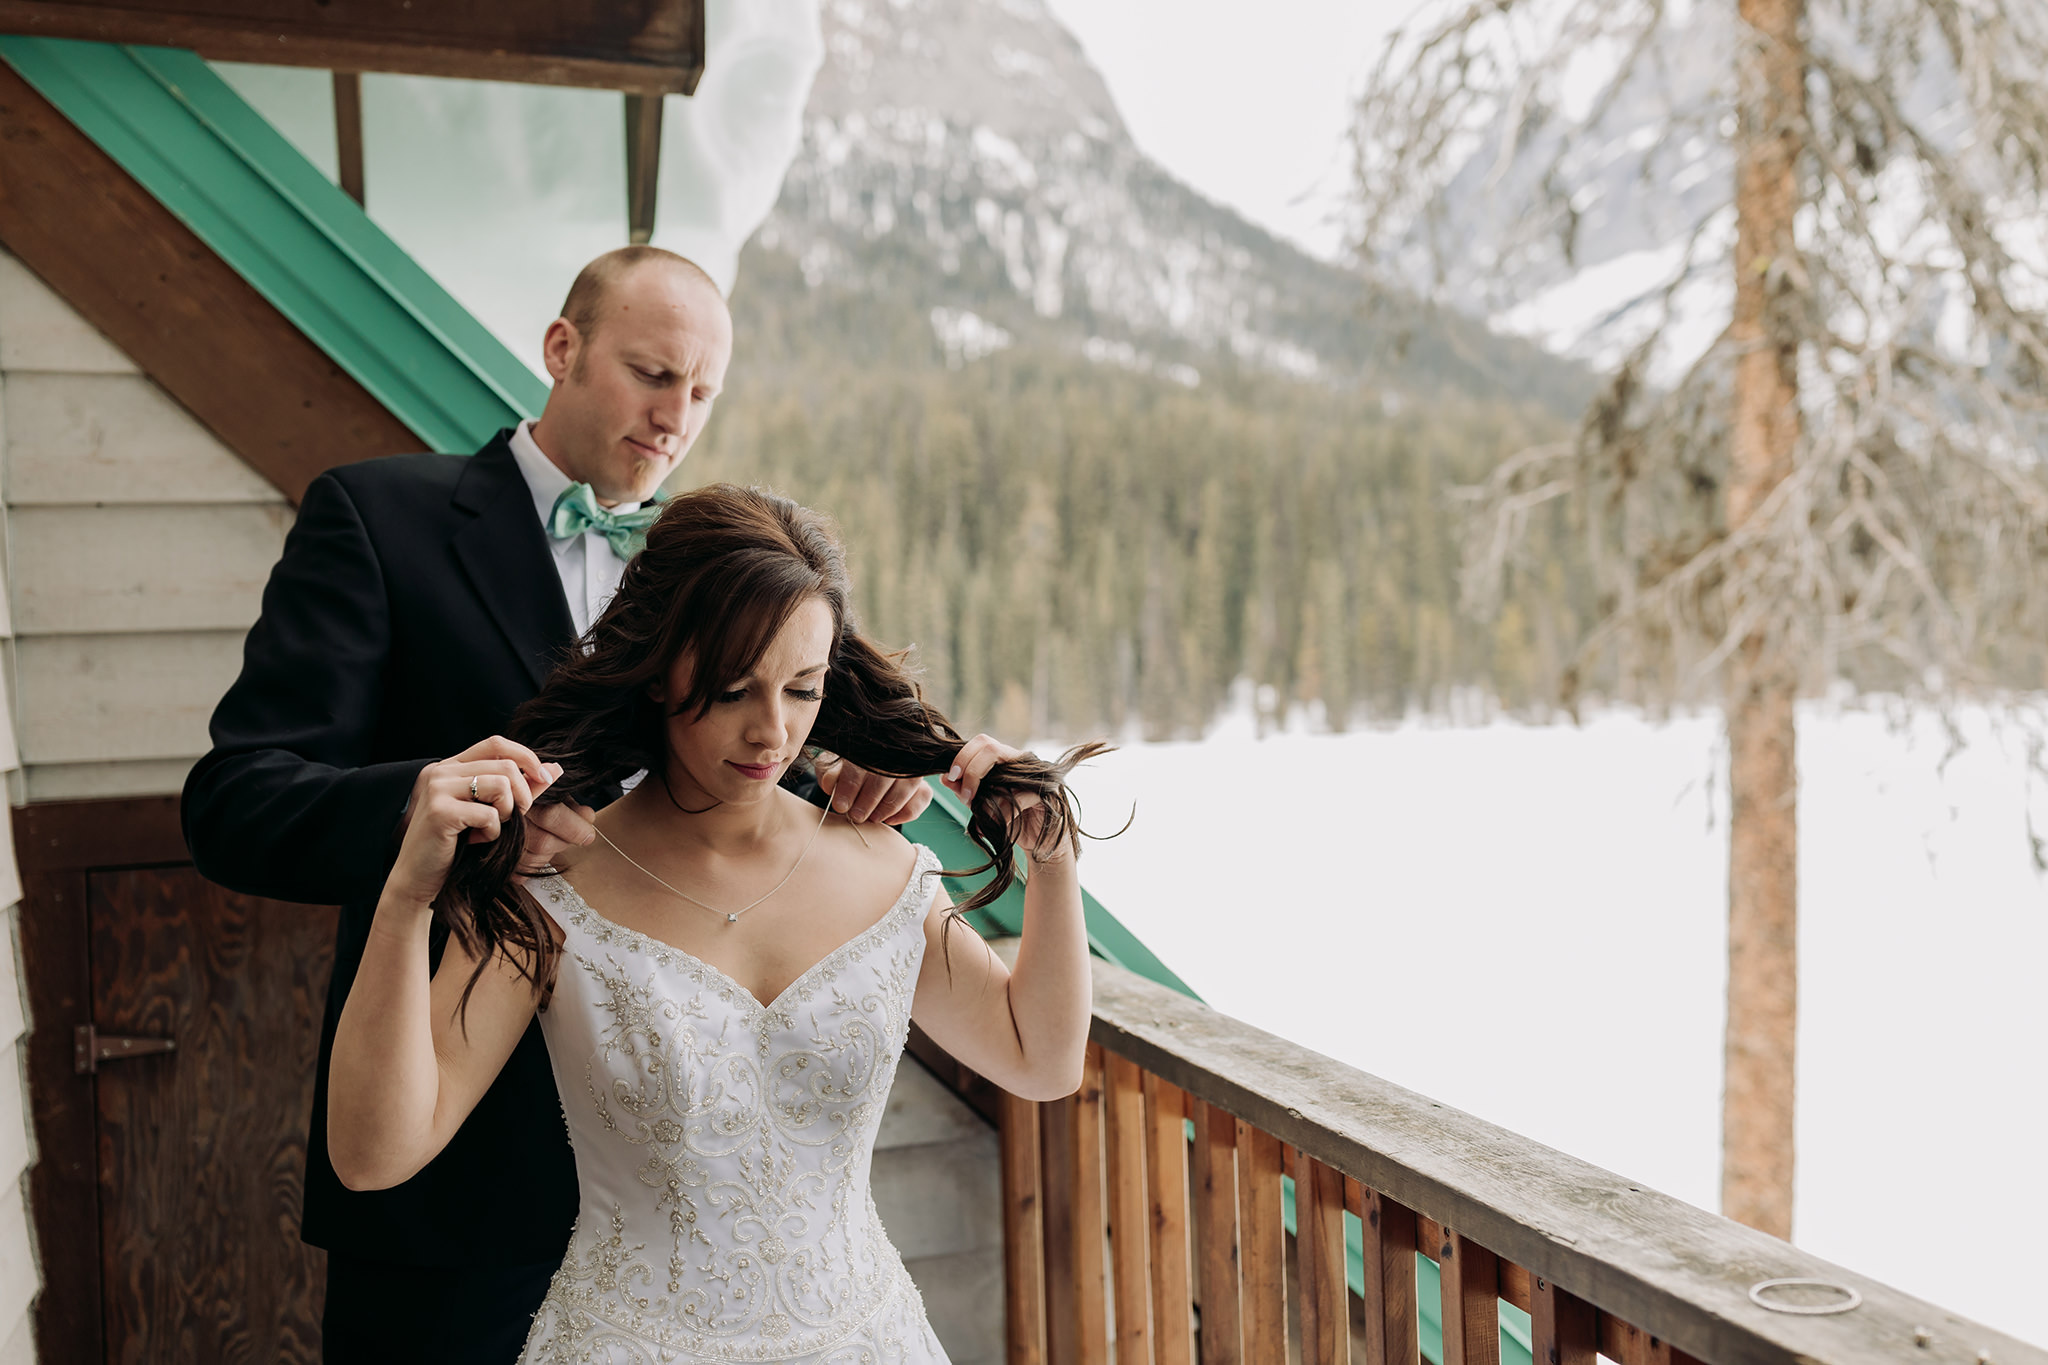 Emerald Lake Lodge elopement bride & groom getting ready together in rustic cabin for spring mountain elopement